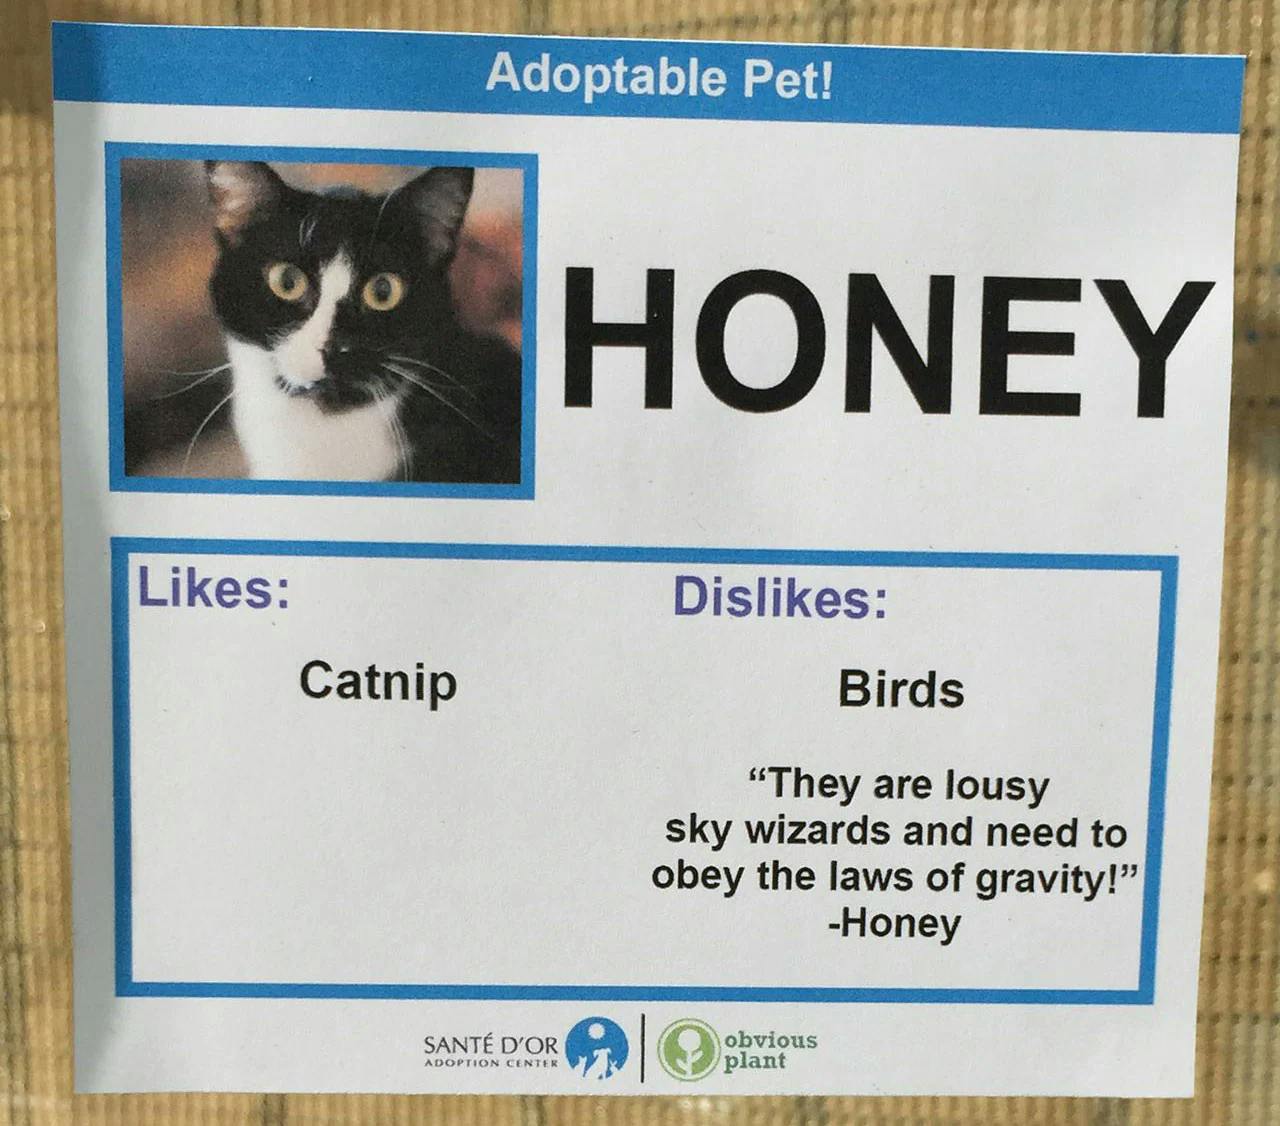 Picture of an adoption sign. There is a black and white cat with the text Honey next to it. Underneath it reads: Likes: catnip. Dislikes: Birds. And in quotation marks is They are lousy sky wizards that need to obey the laws of gravity! - honey. Sante D'or adoption center obvious plant